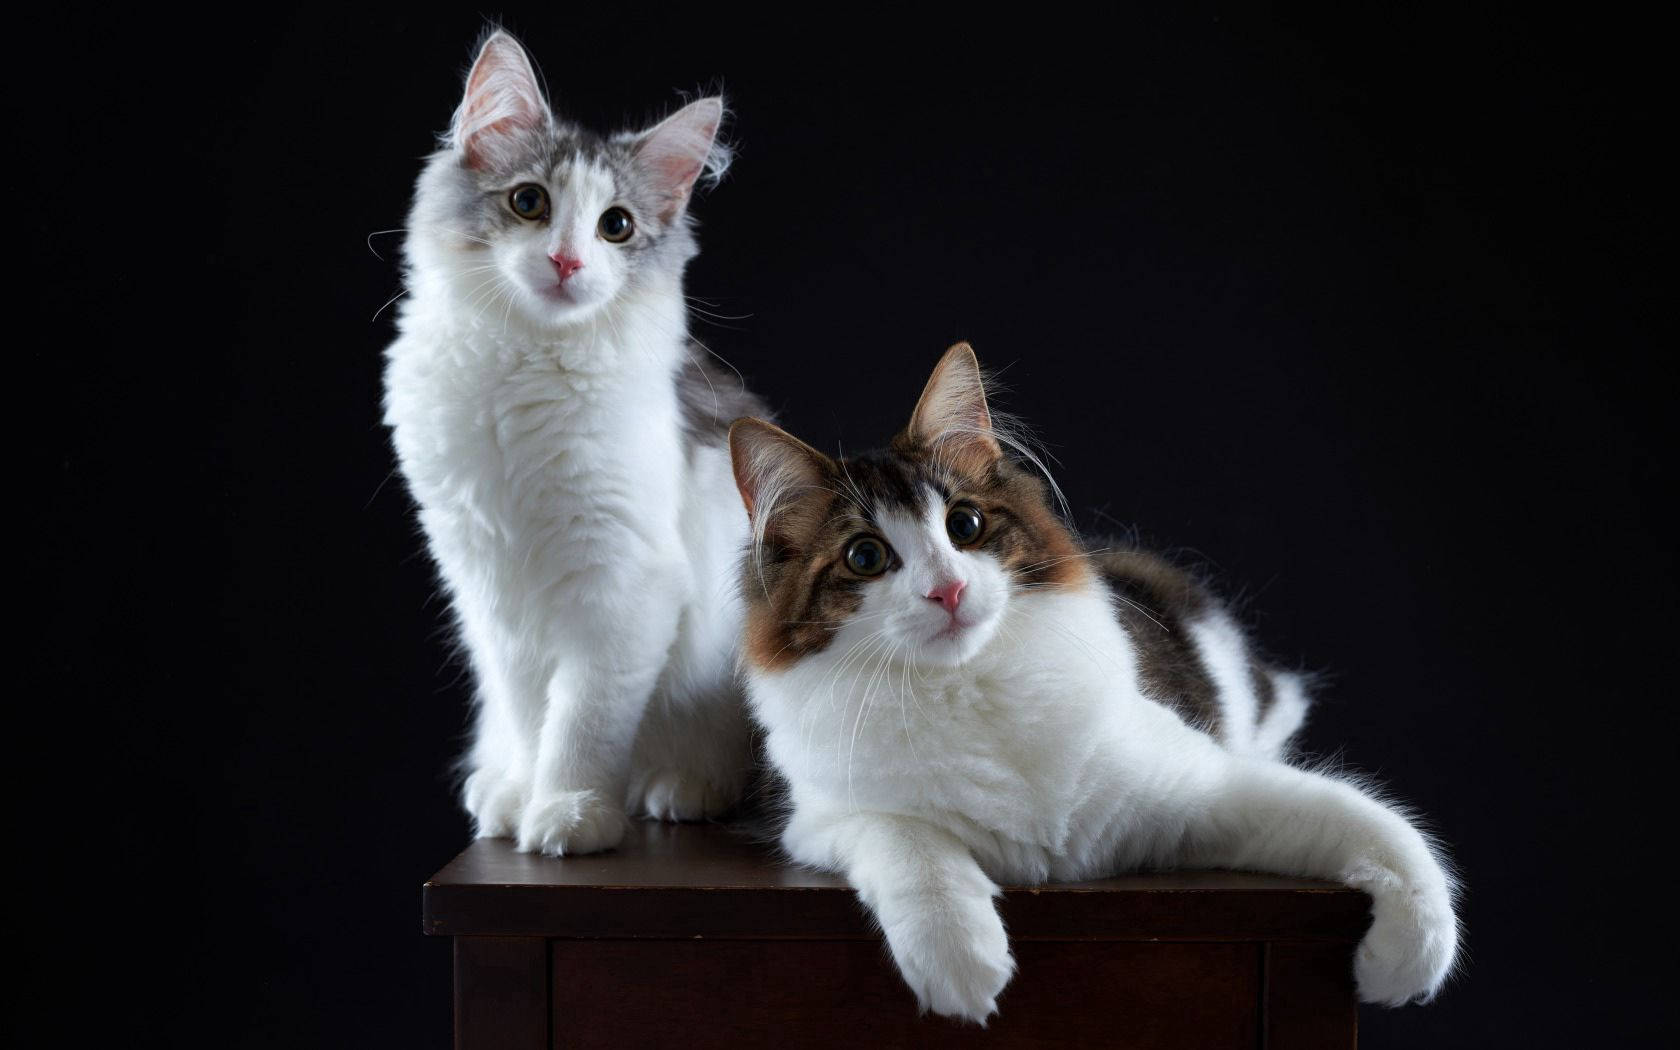 Couple cats on top of the table looking at the photographer. Cute furry animal friends.